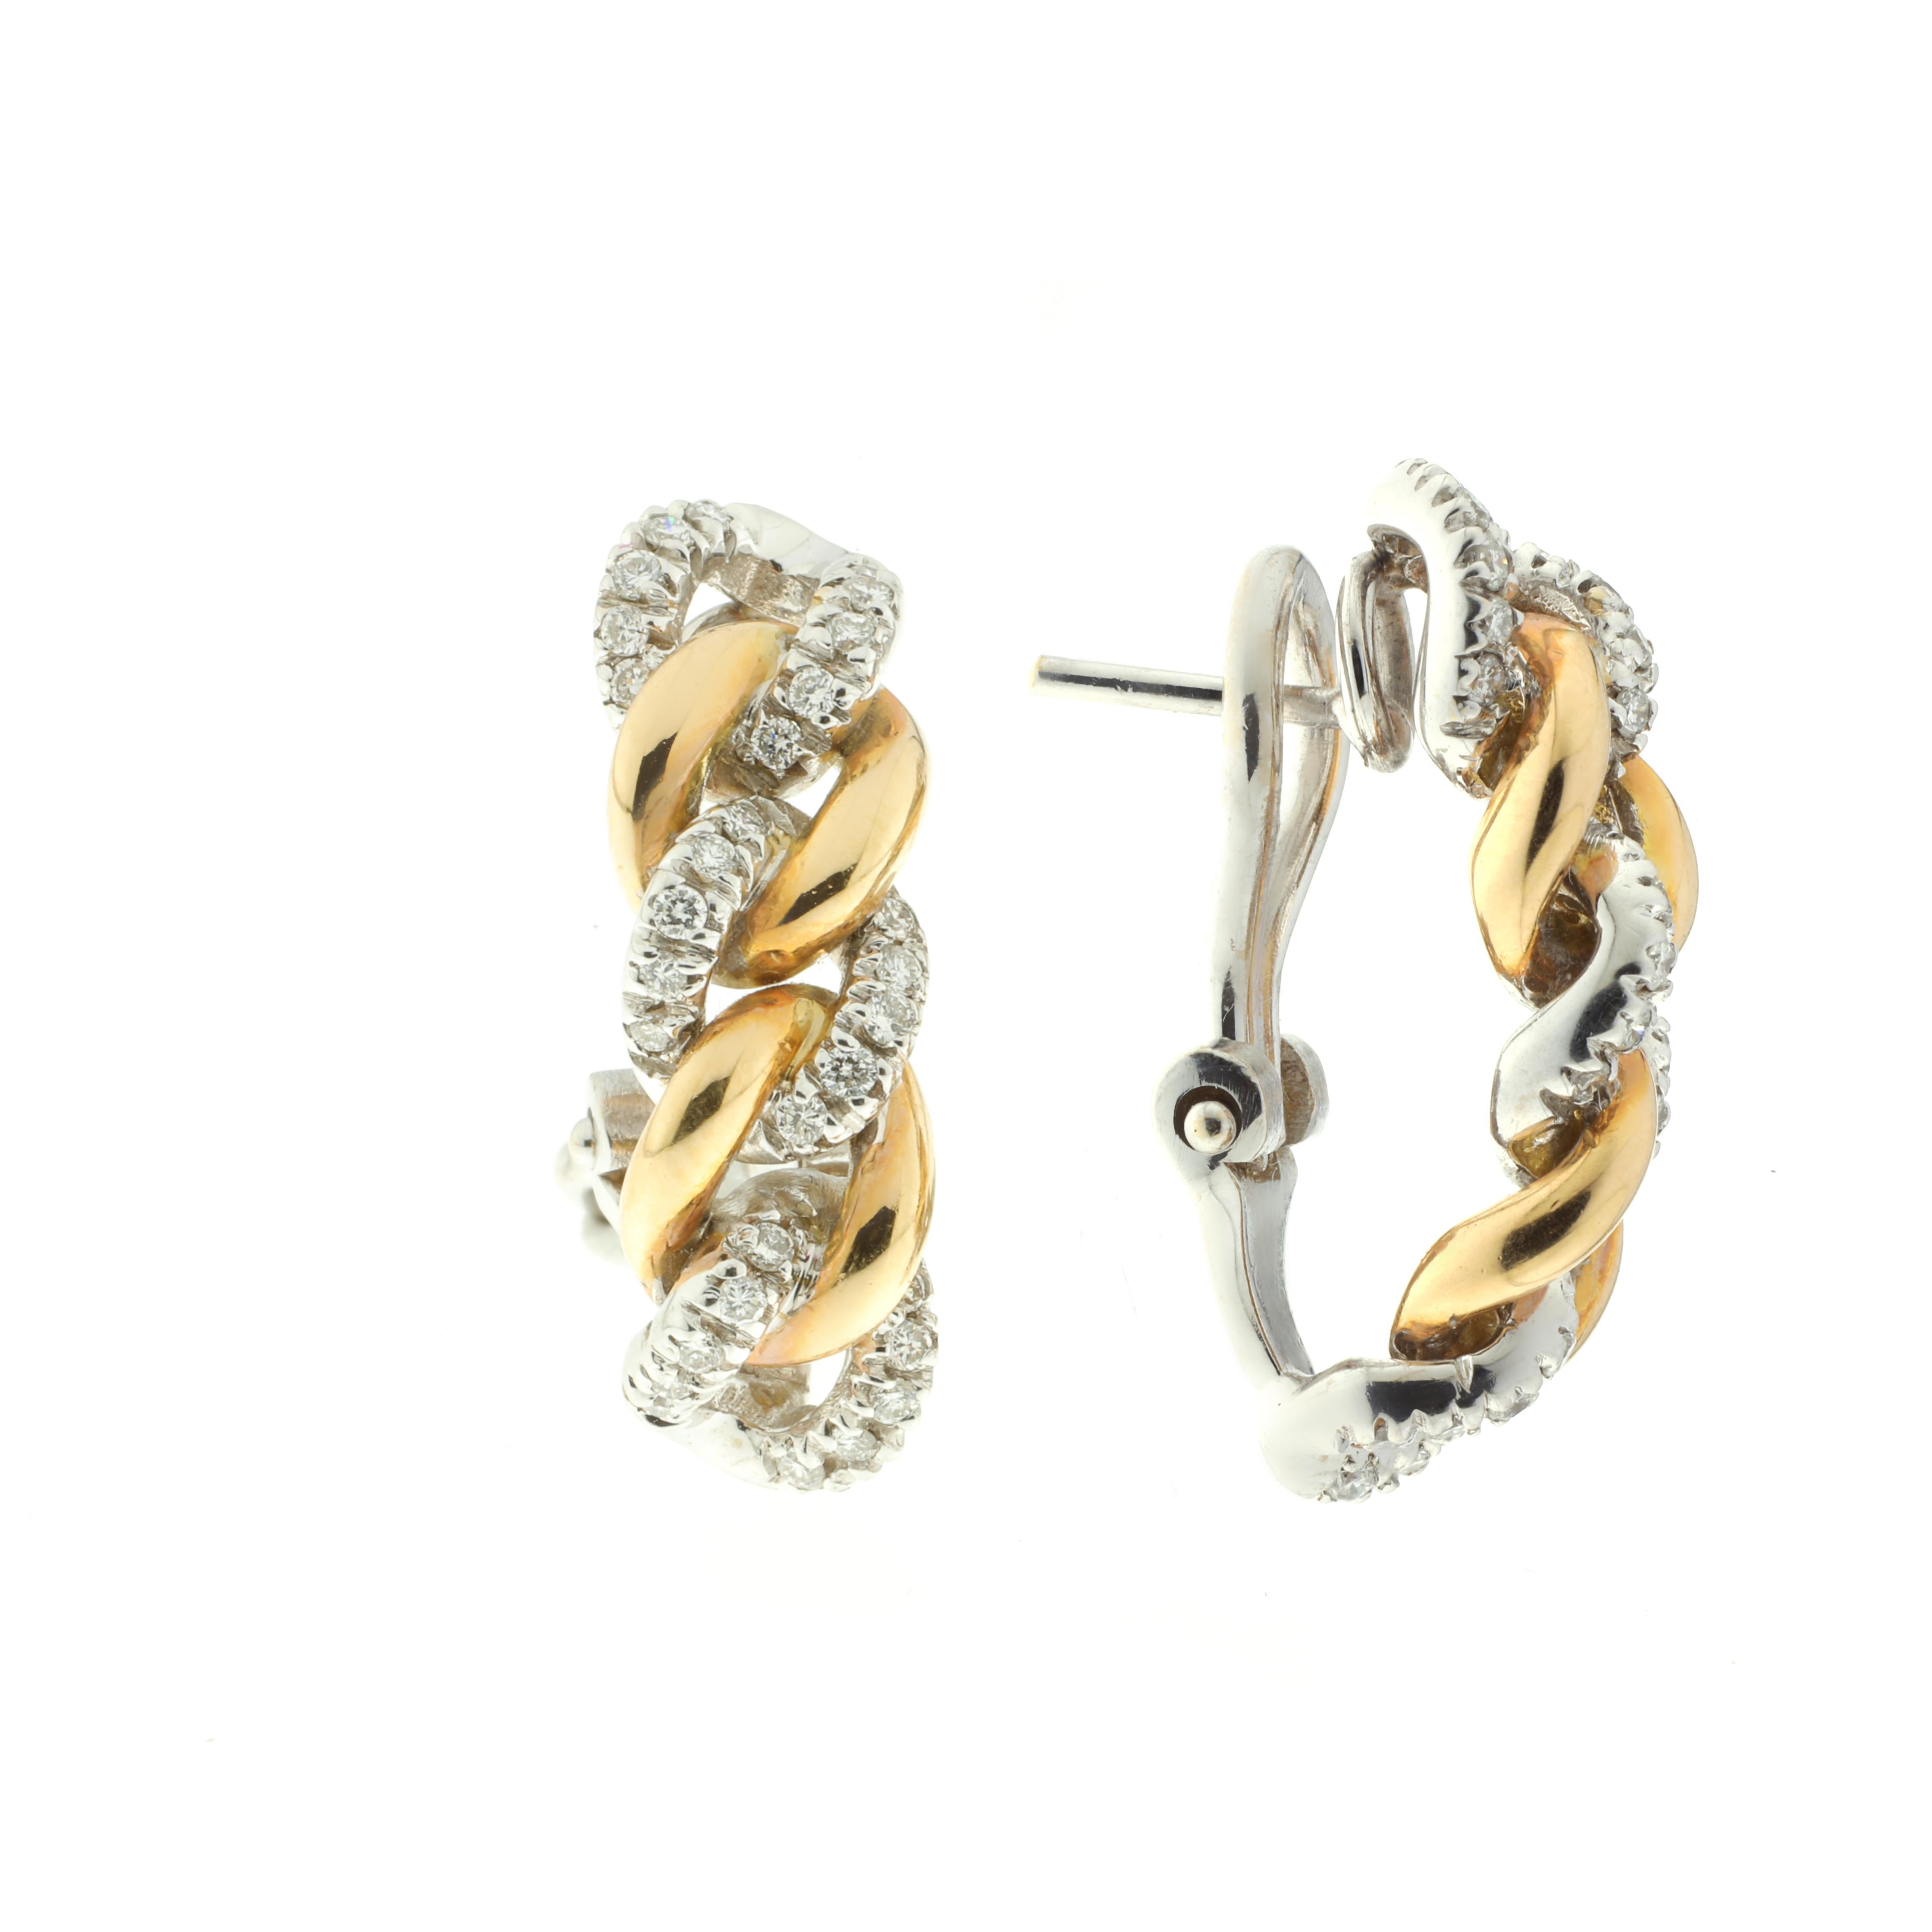 These earrings, masterfully created entirely by hand from 18-karat rose and white gold and set with brilliant white diamonds feature a sophisticated dropped curb-link design. Their gentle arc sets off the intricately-set diamonds in any light as